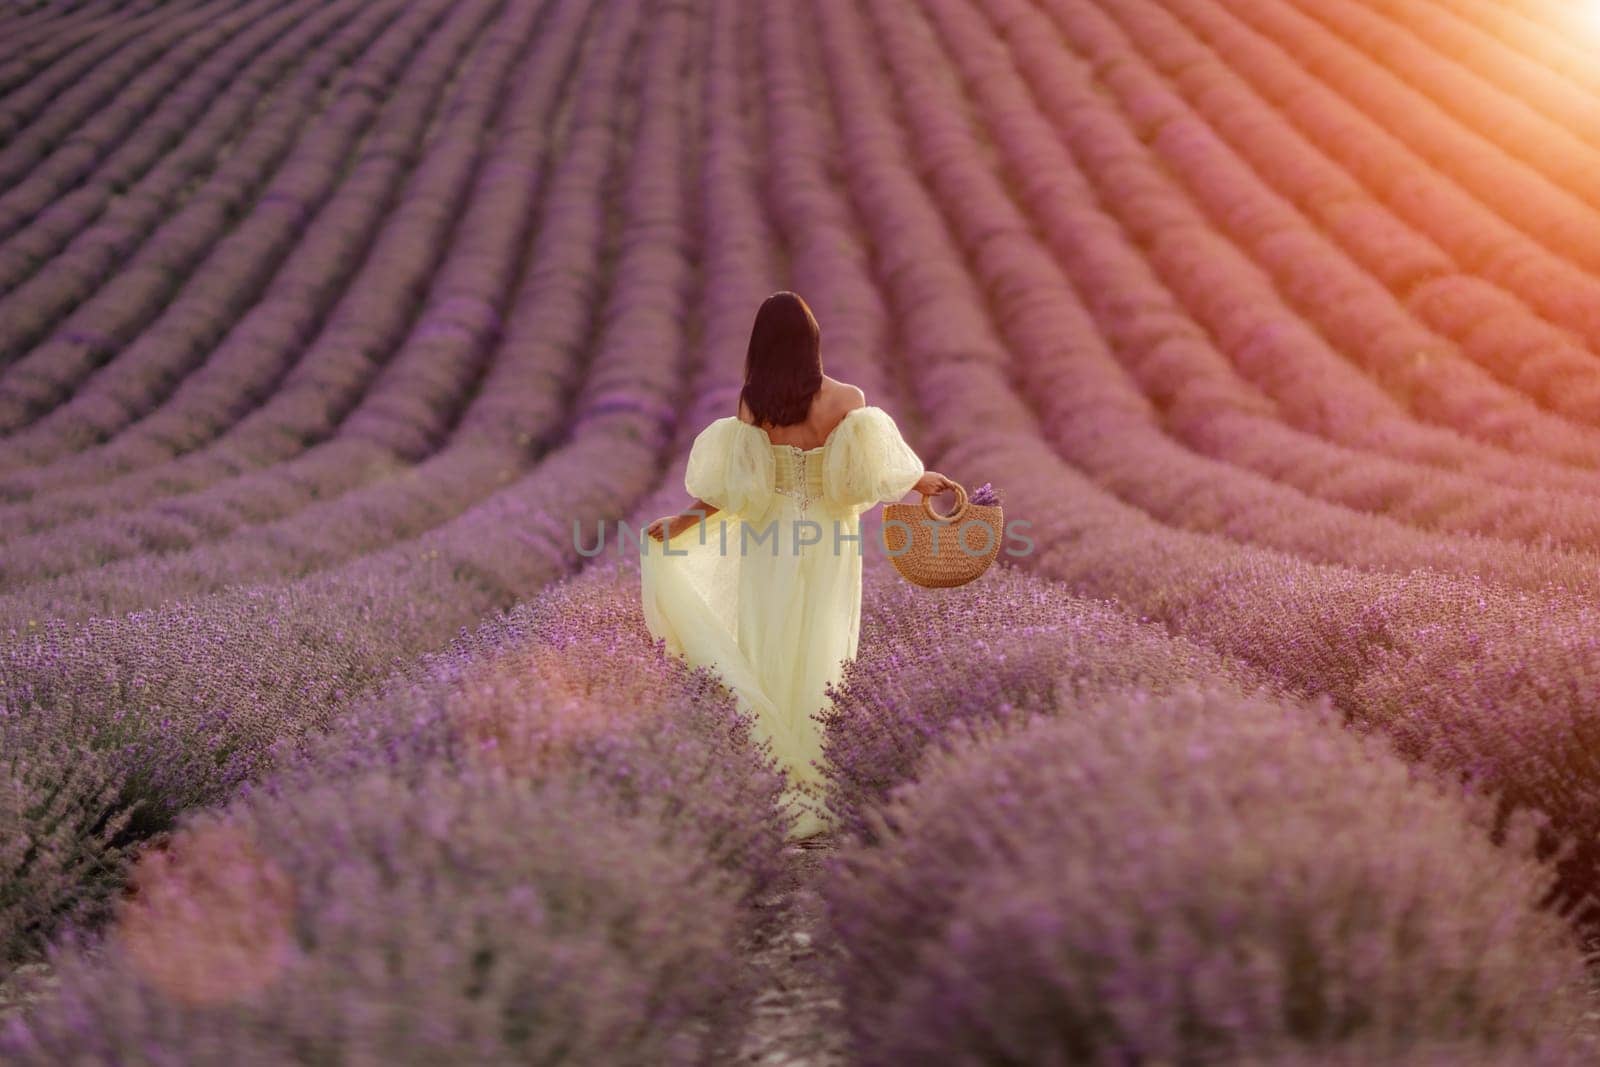 A woman in a yellow dress walks through a field of lavender. The scene is serene and peaceful, with the woman's presence adding a sense of calm to the landscape